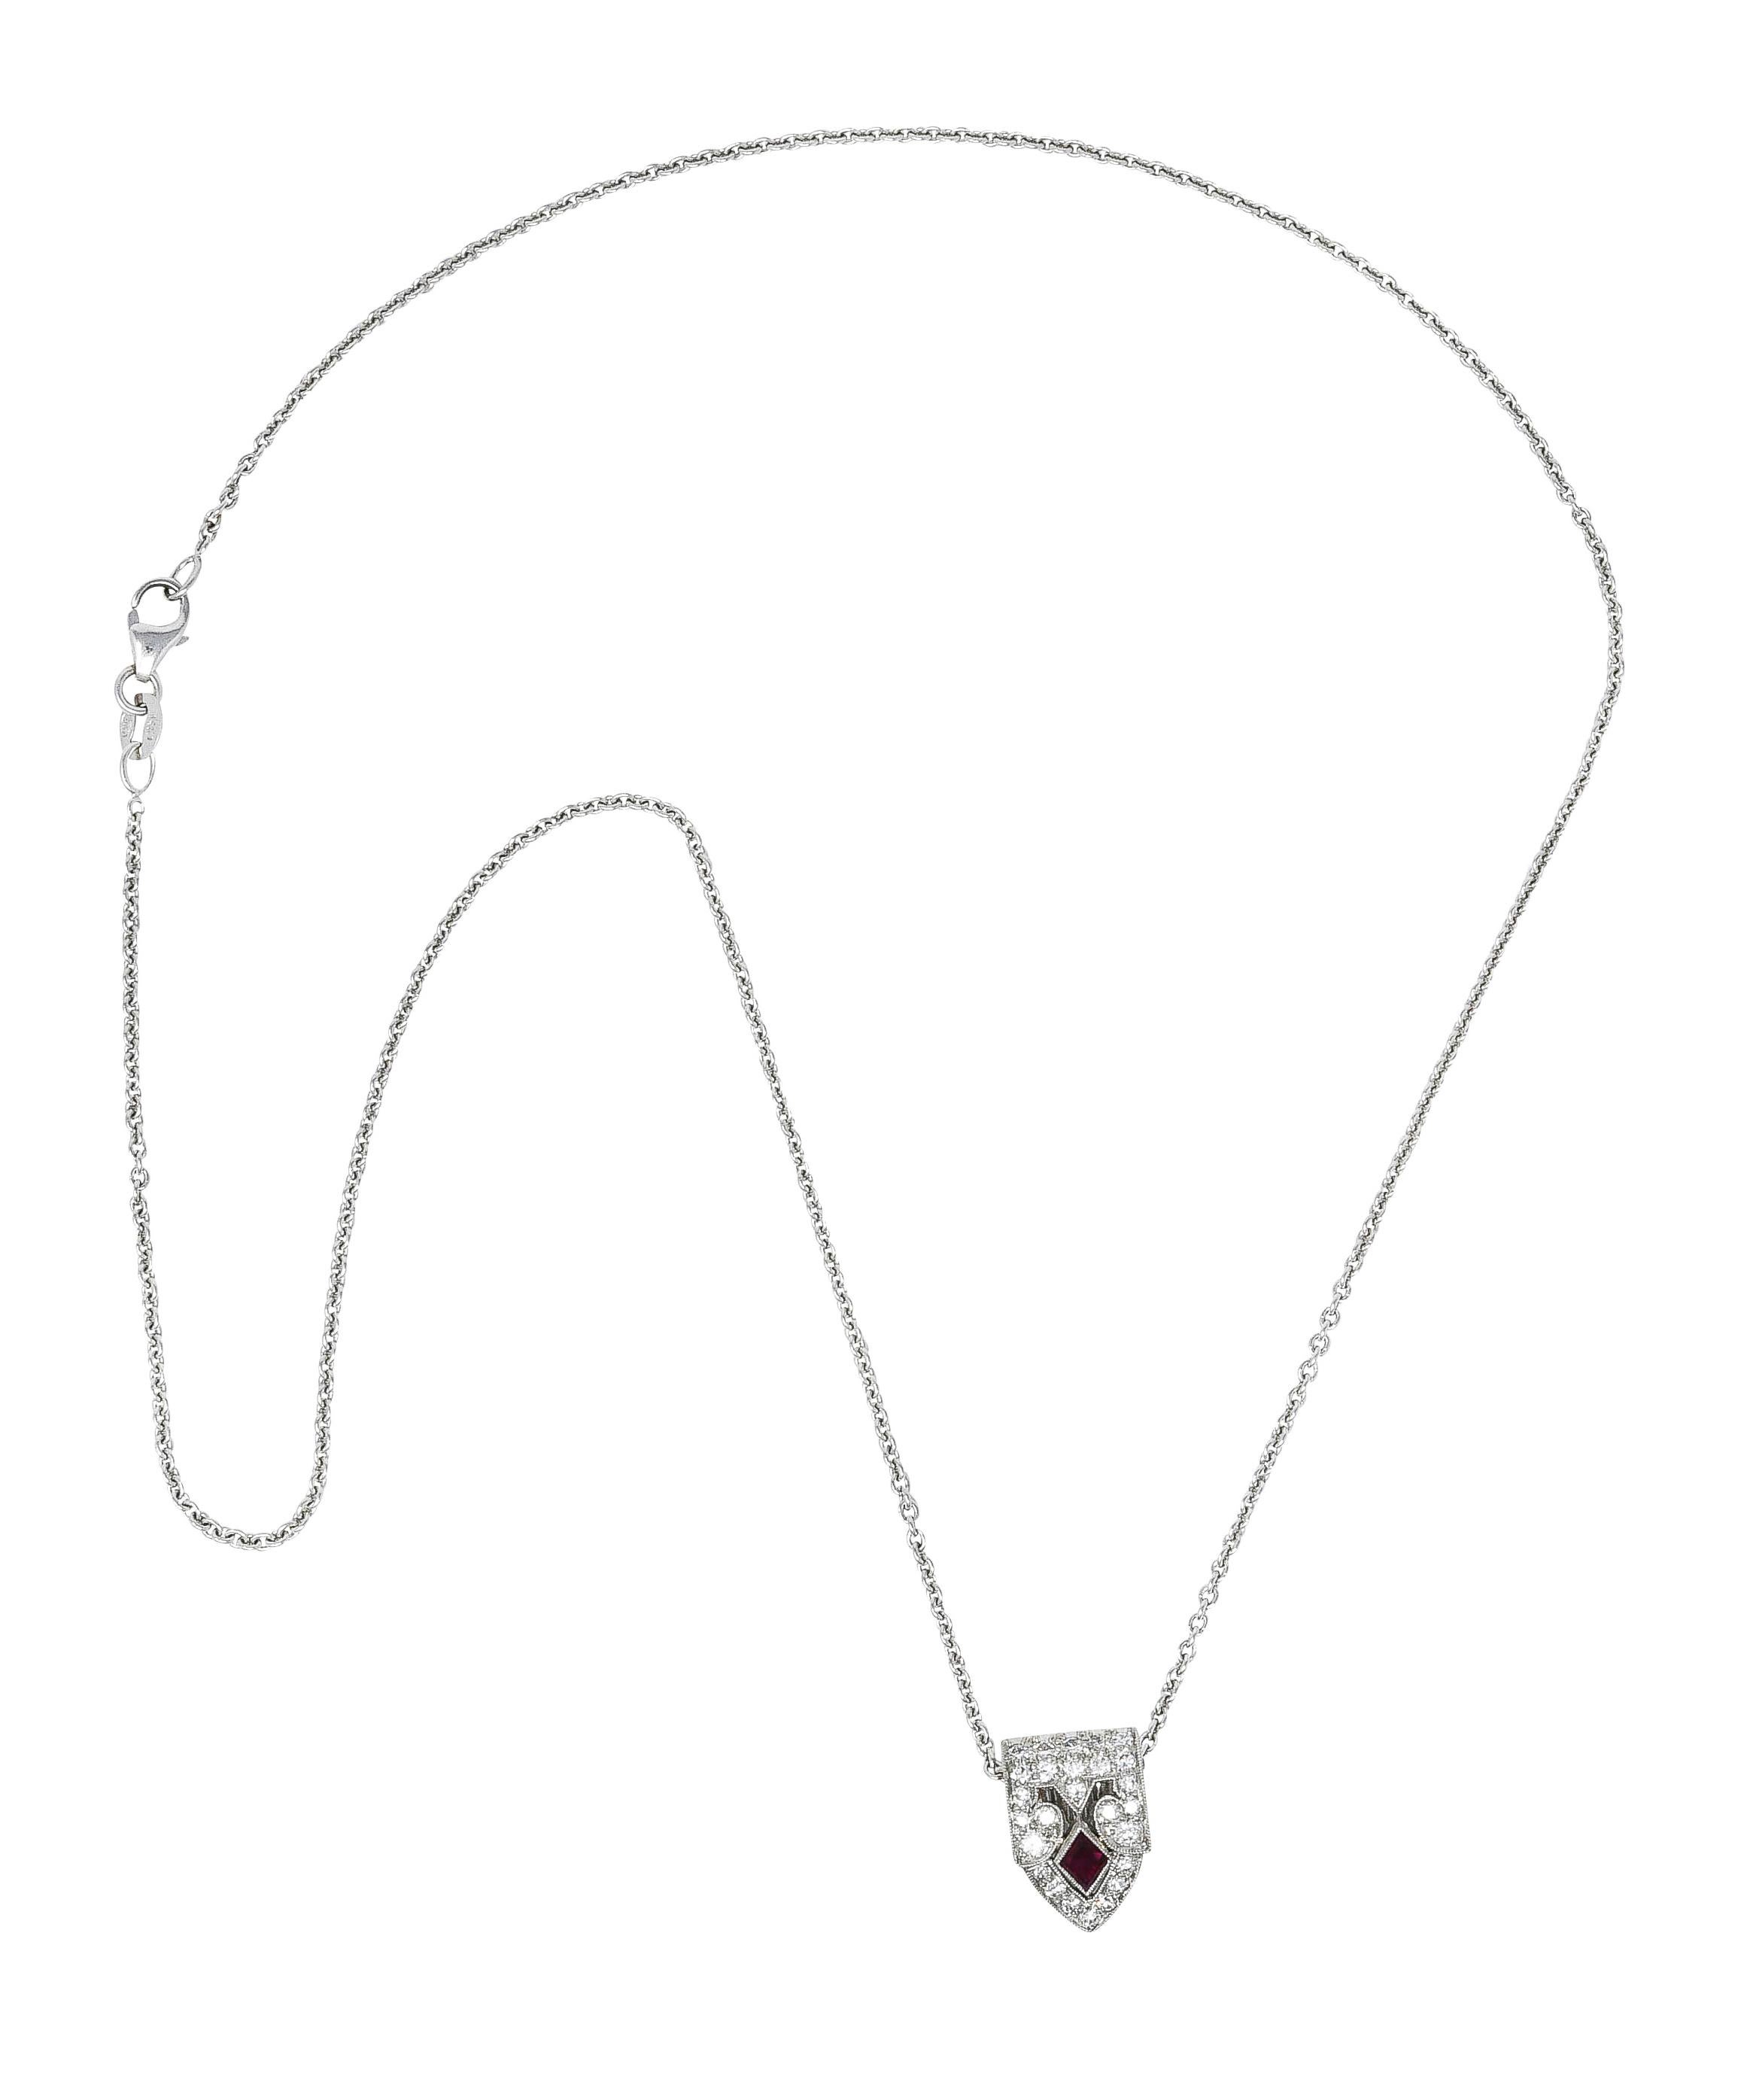 Cable chain necklace features a dynamically domed and pointed enhancer pendant clip

Opens on a hinge while featuring milgrain and a navette cut ruby

Weighing approximately 0.20 carat - slightly purple and strongly red in color

Surrounded by round